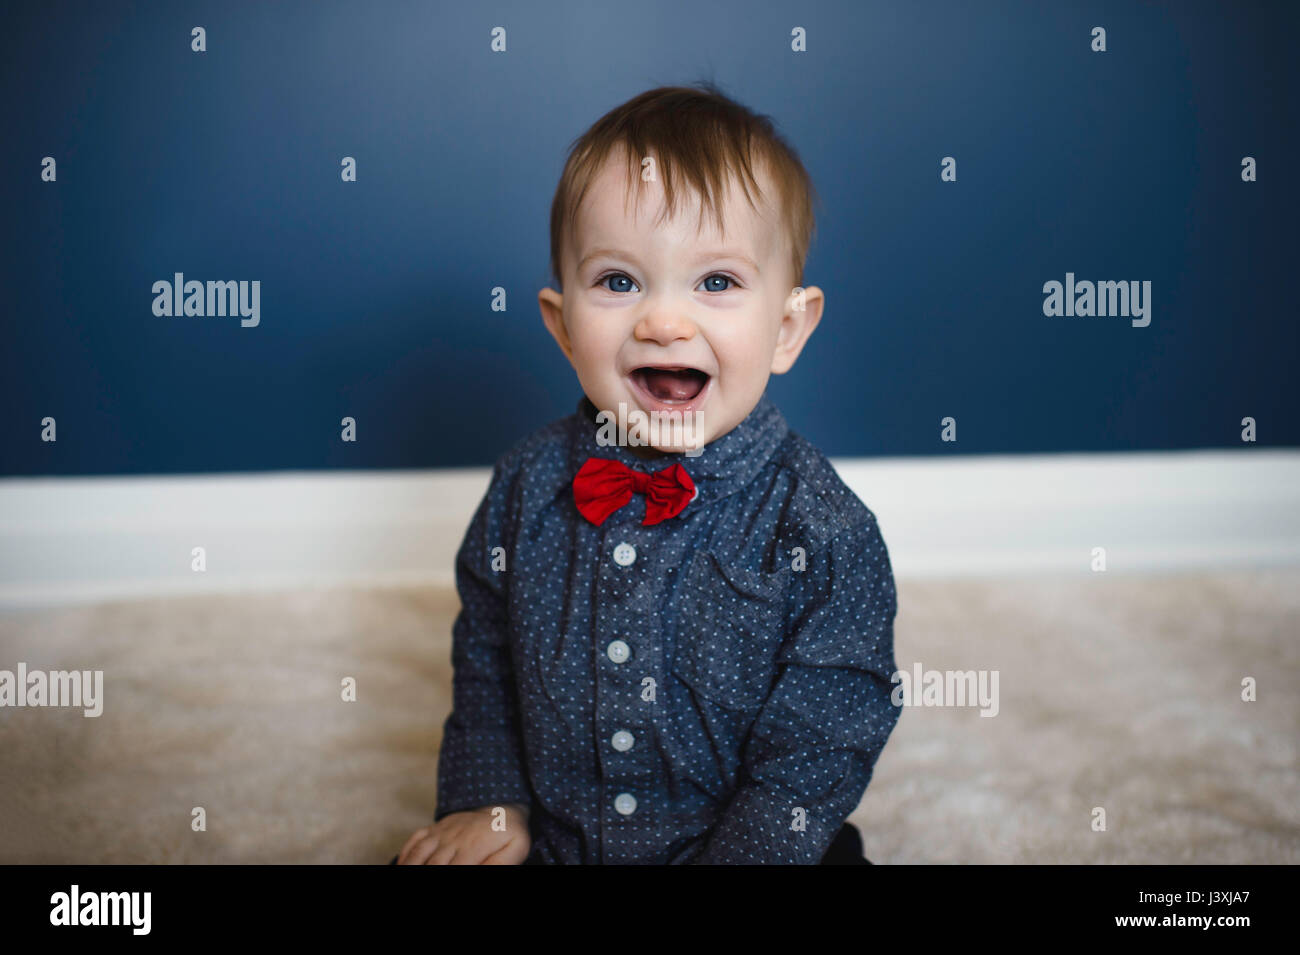 Portrait of male toddler in red bow tie sitting on floor Stock Photo